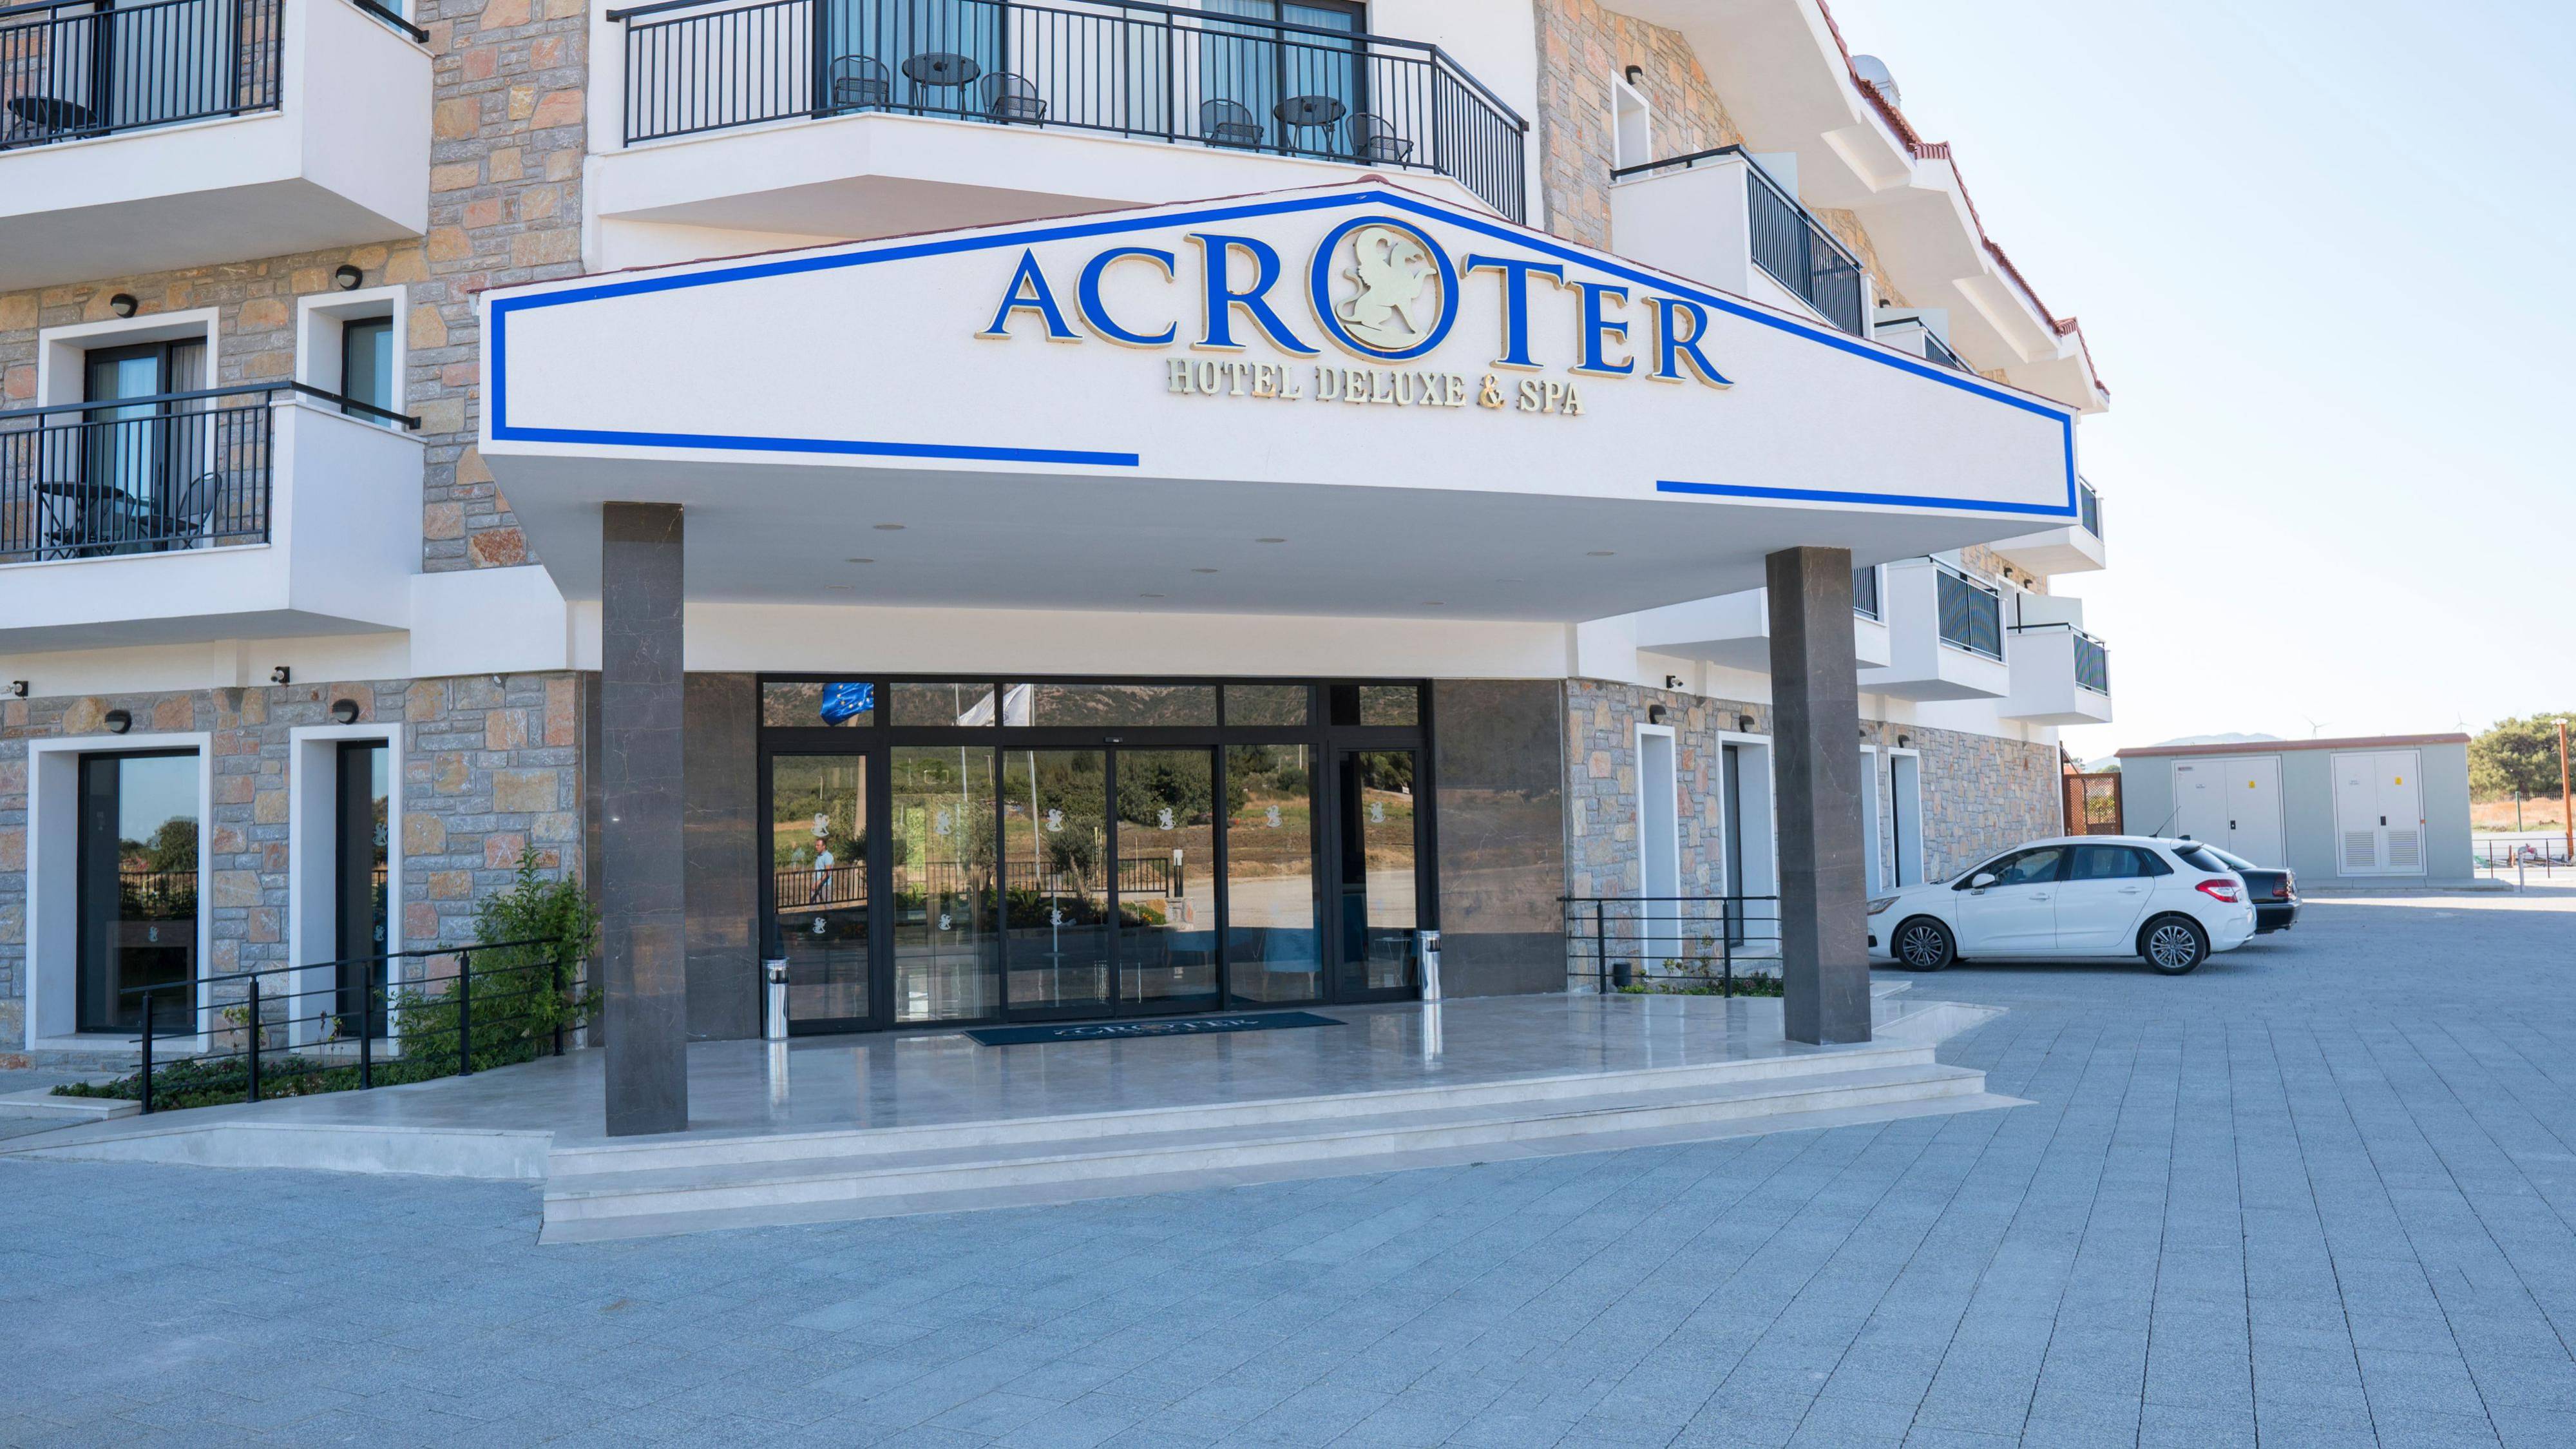 Acroter Hotel & Spa